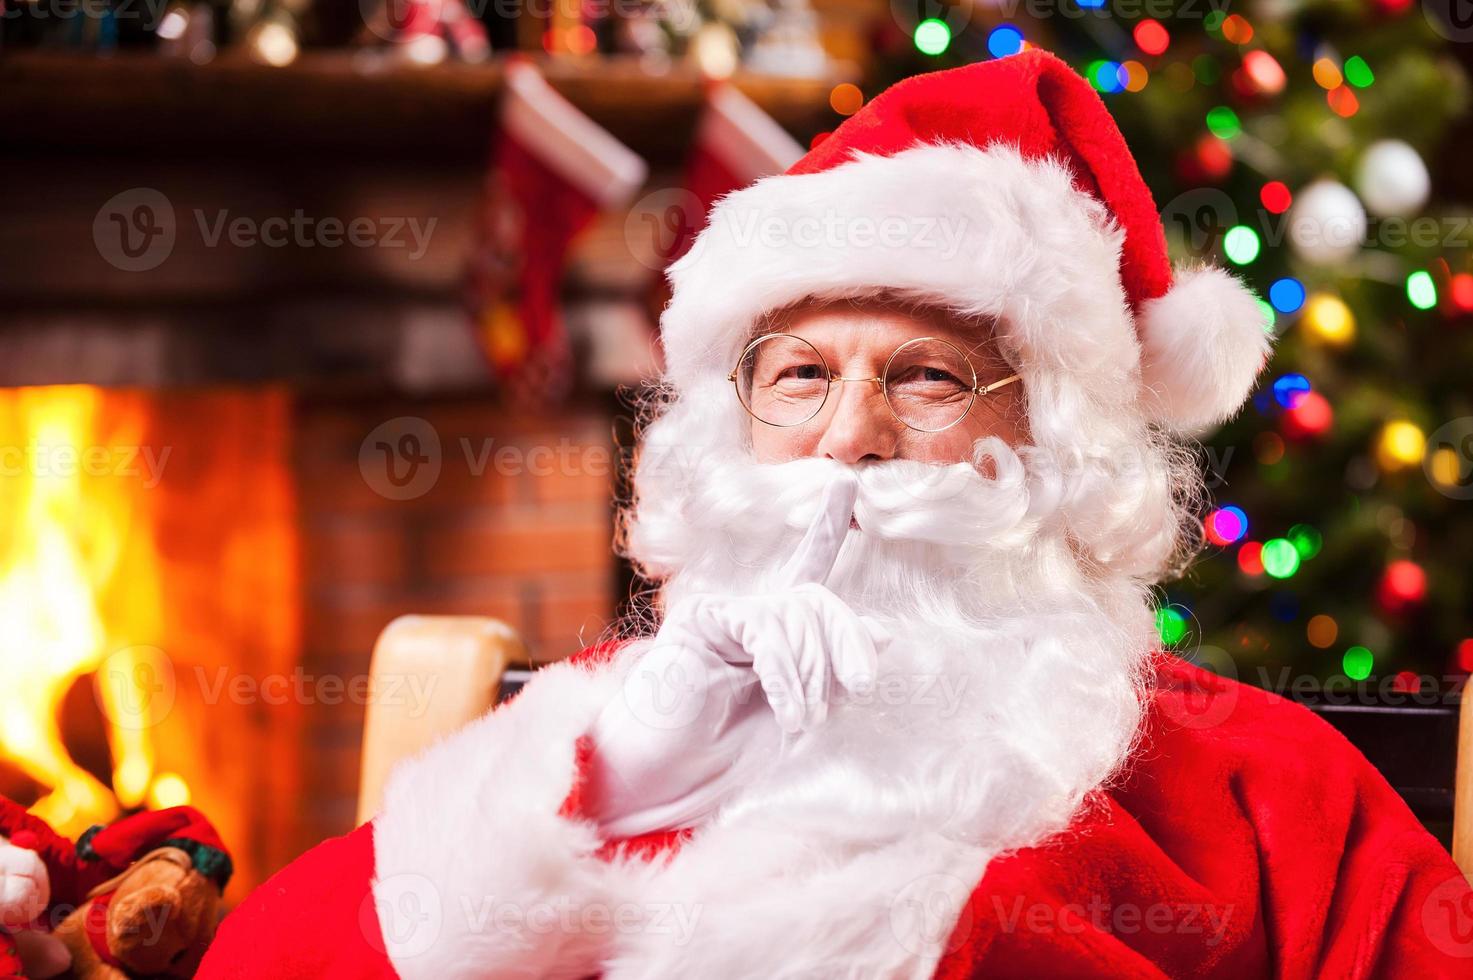 You did not see me Traditional Santa Claus gesturing silence sign while sitting at his chair with fireplace and Christmas Tree in the background photo